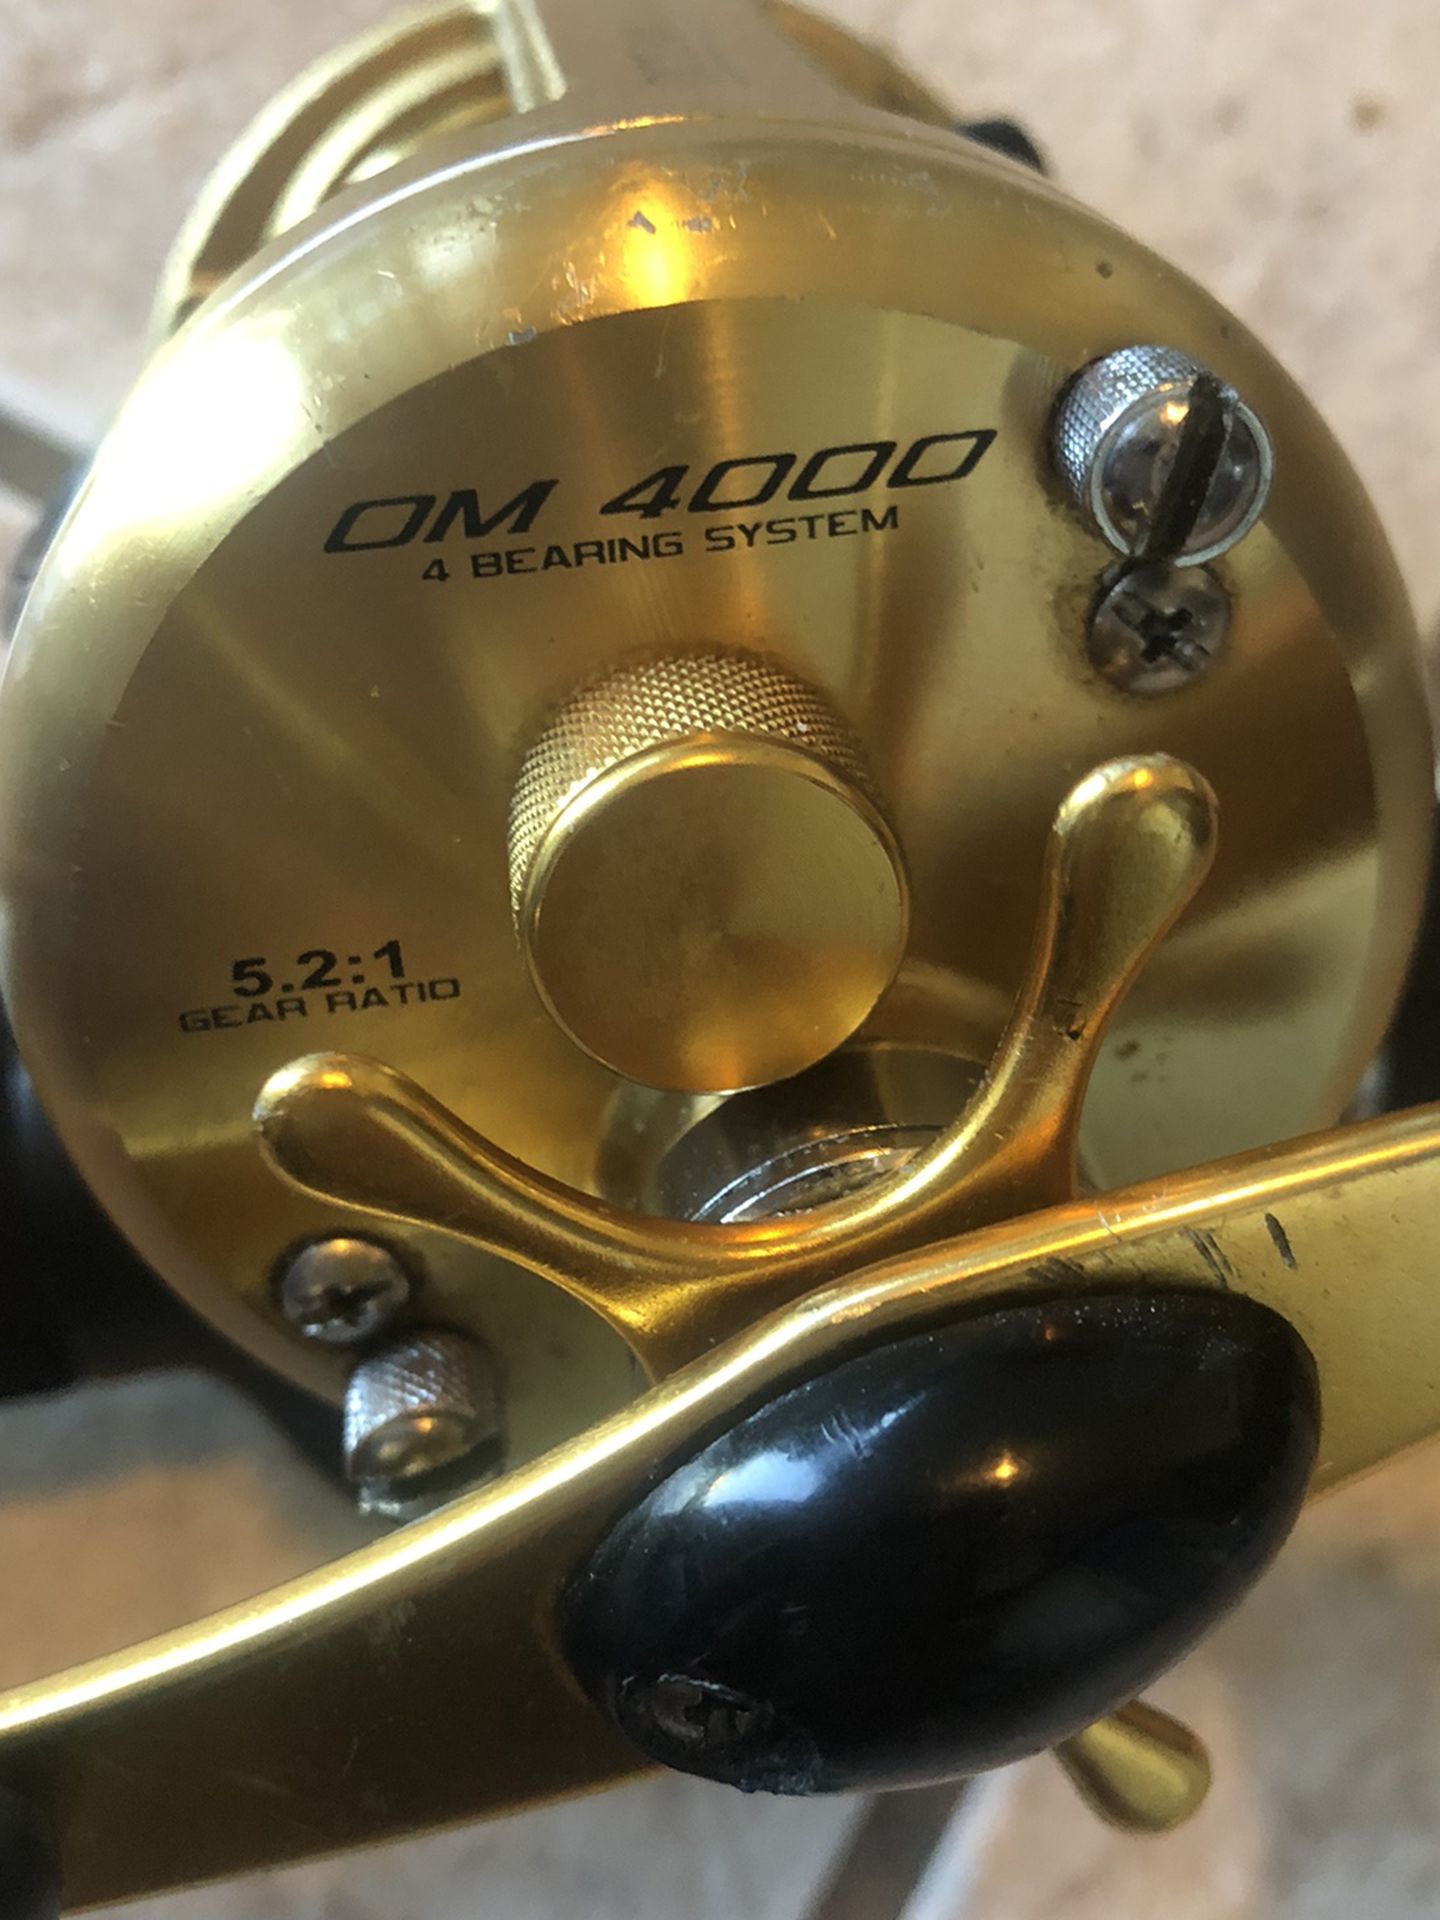 OM 4000 reel with 7” Ugly Stick